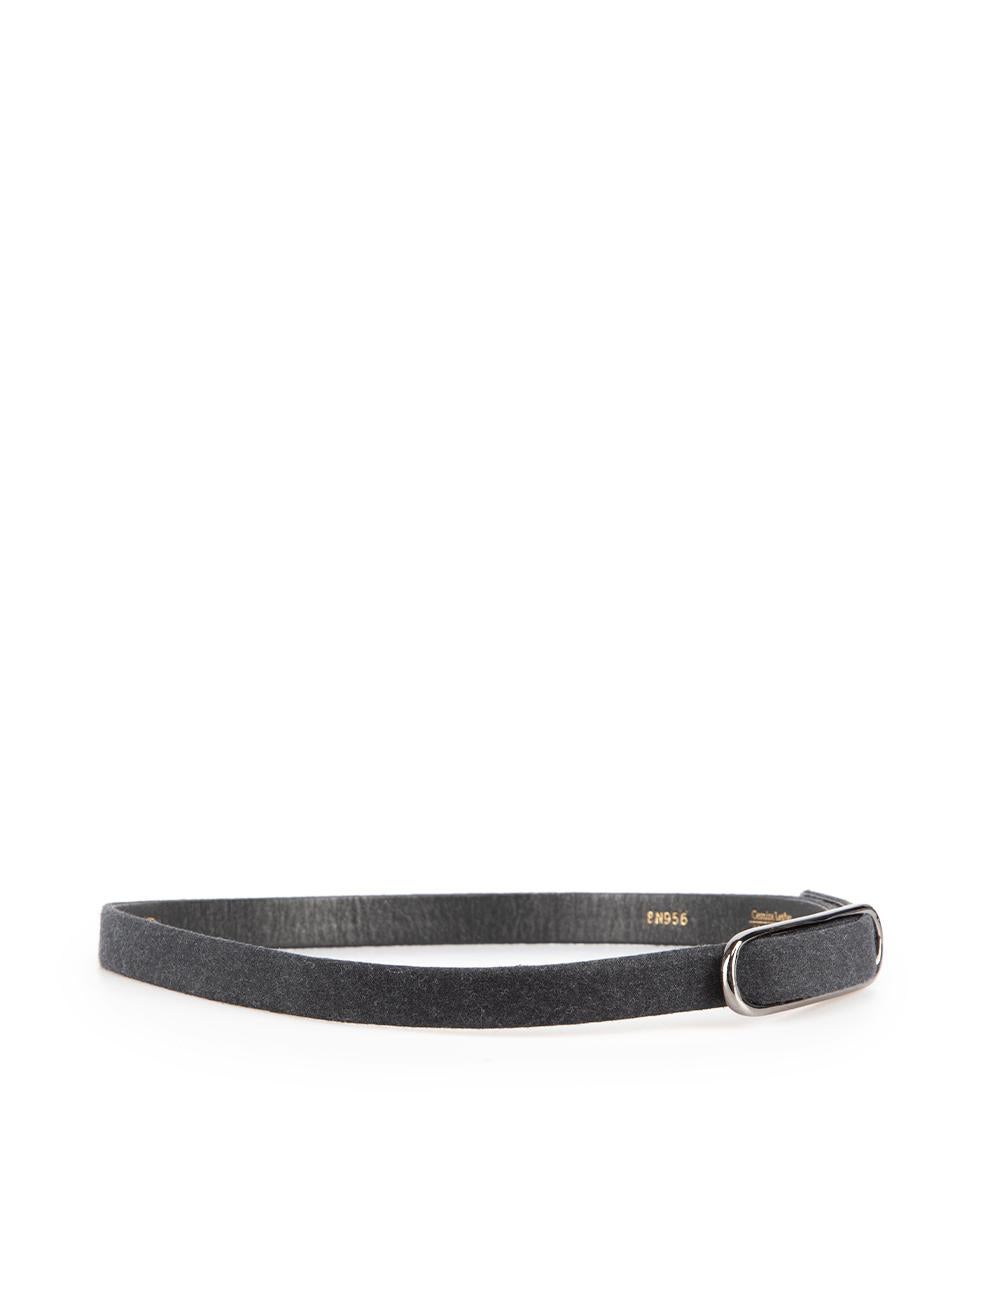 CONDITION is Very good. Hardly any visible wear to belt is evident on this used Oscar de la Renta designer resale item.
 
Details
Grey
Wool and leather
Skinny belt
Felted wool exterior
 
Made in USA
 
Composition
Wool and leather

Size & Fit
Product